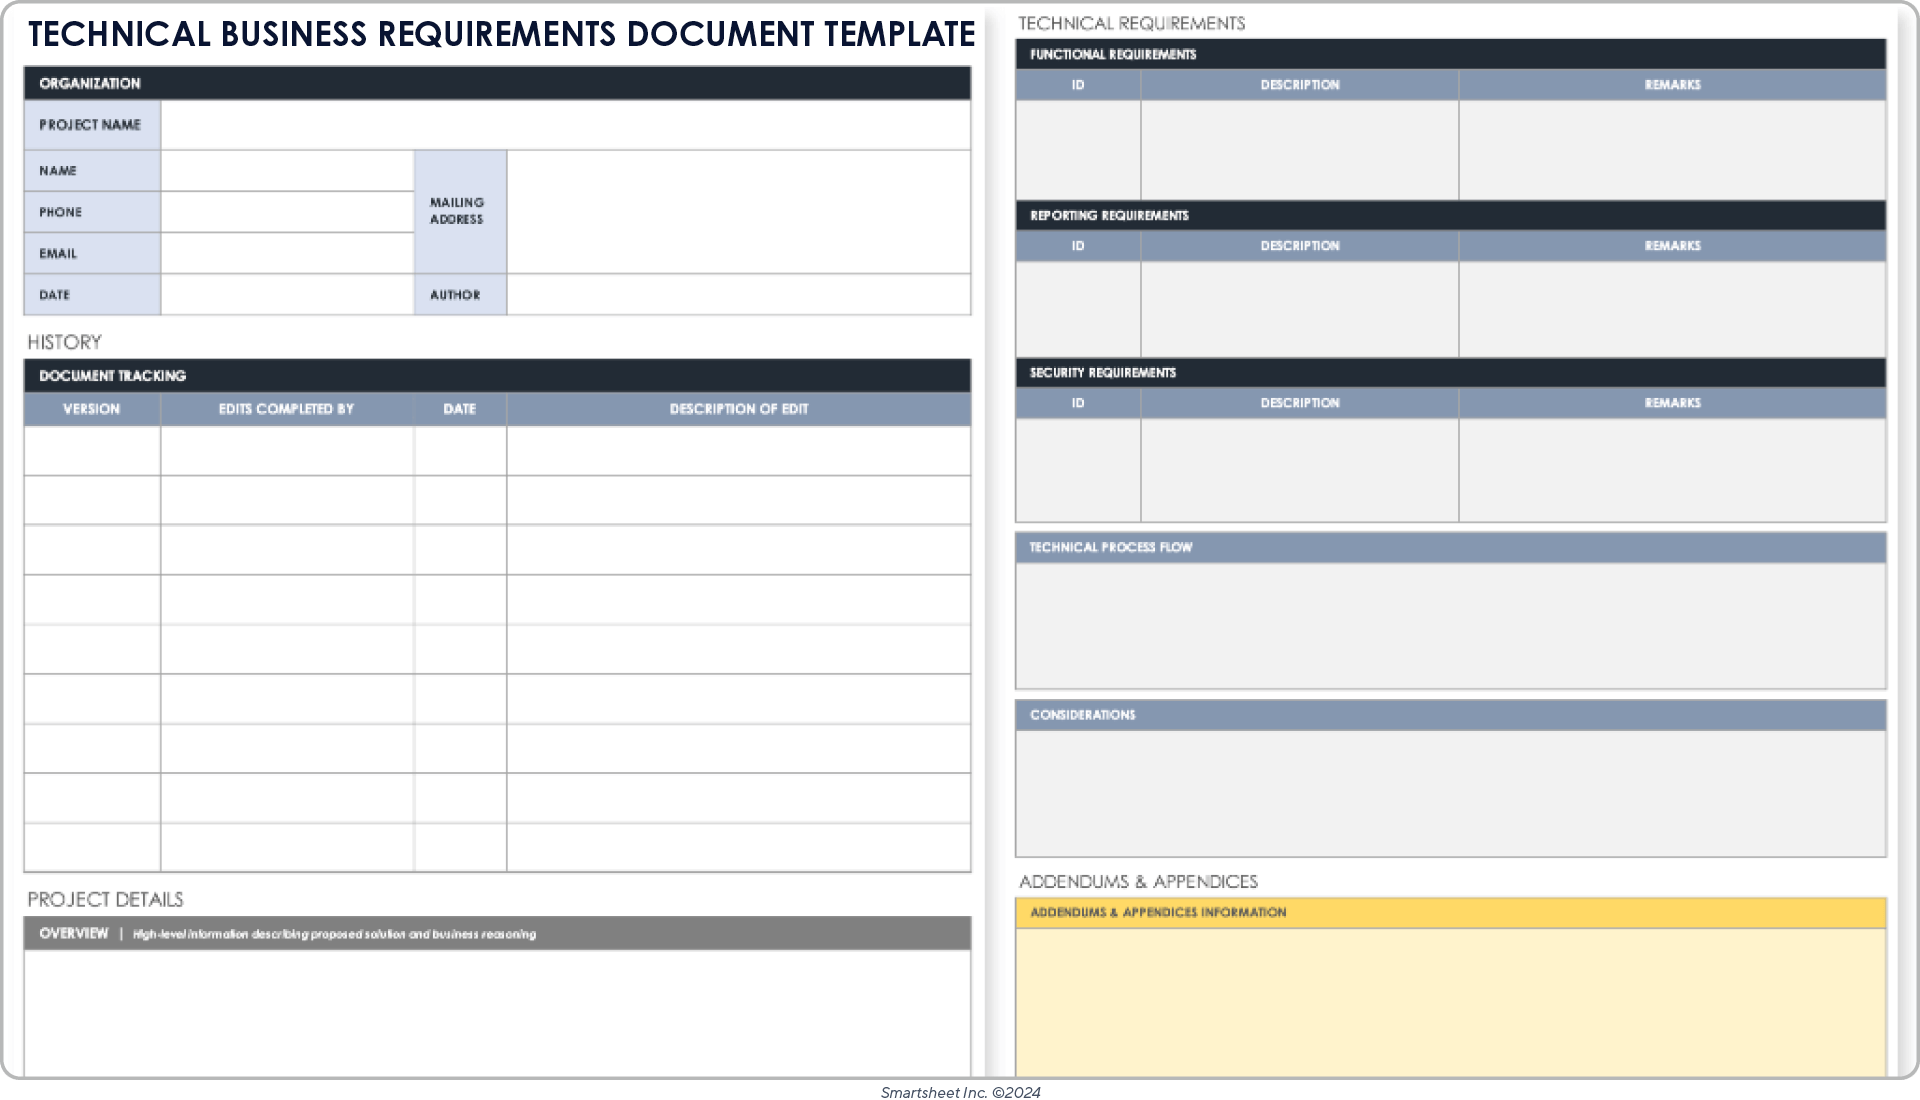 Technical Business Requirements Document Template